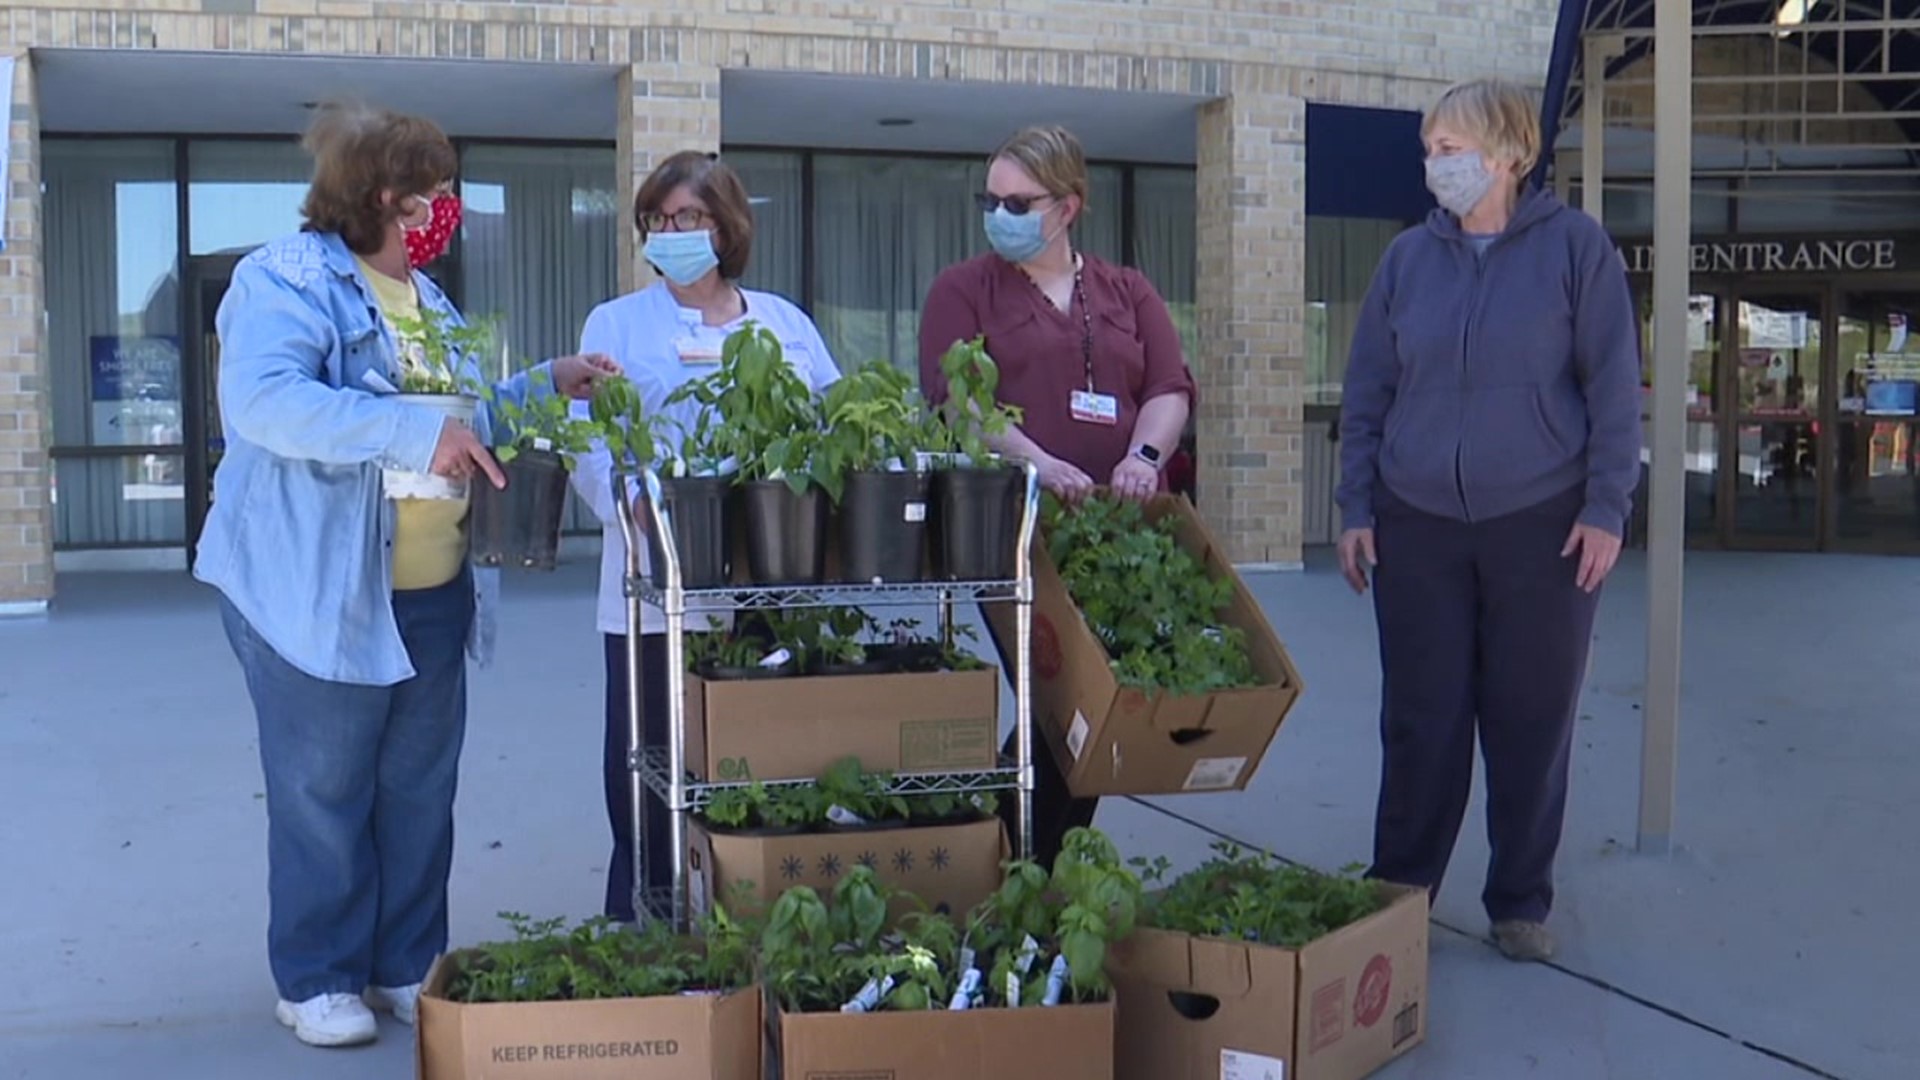 Members of a gardening club provided some blooming gifts for health care workers.